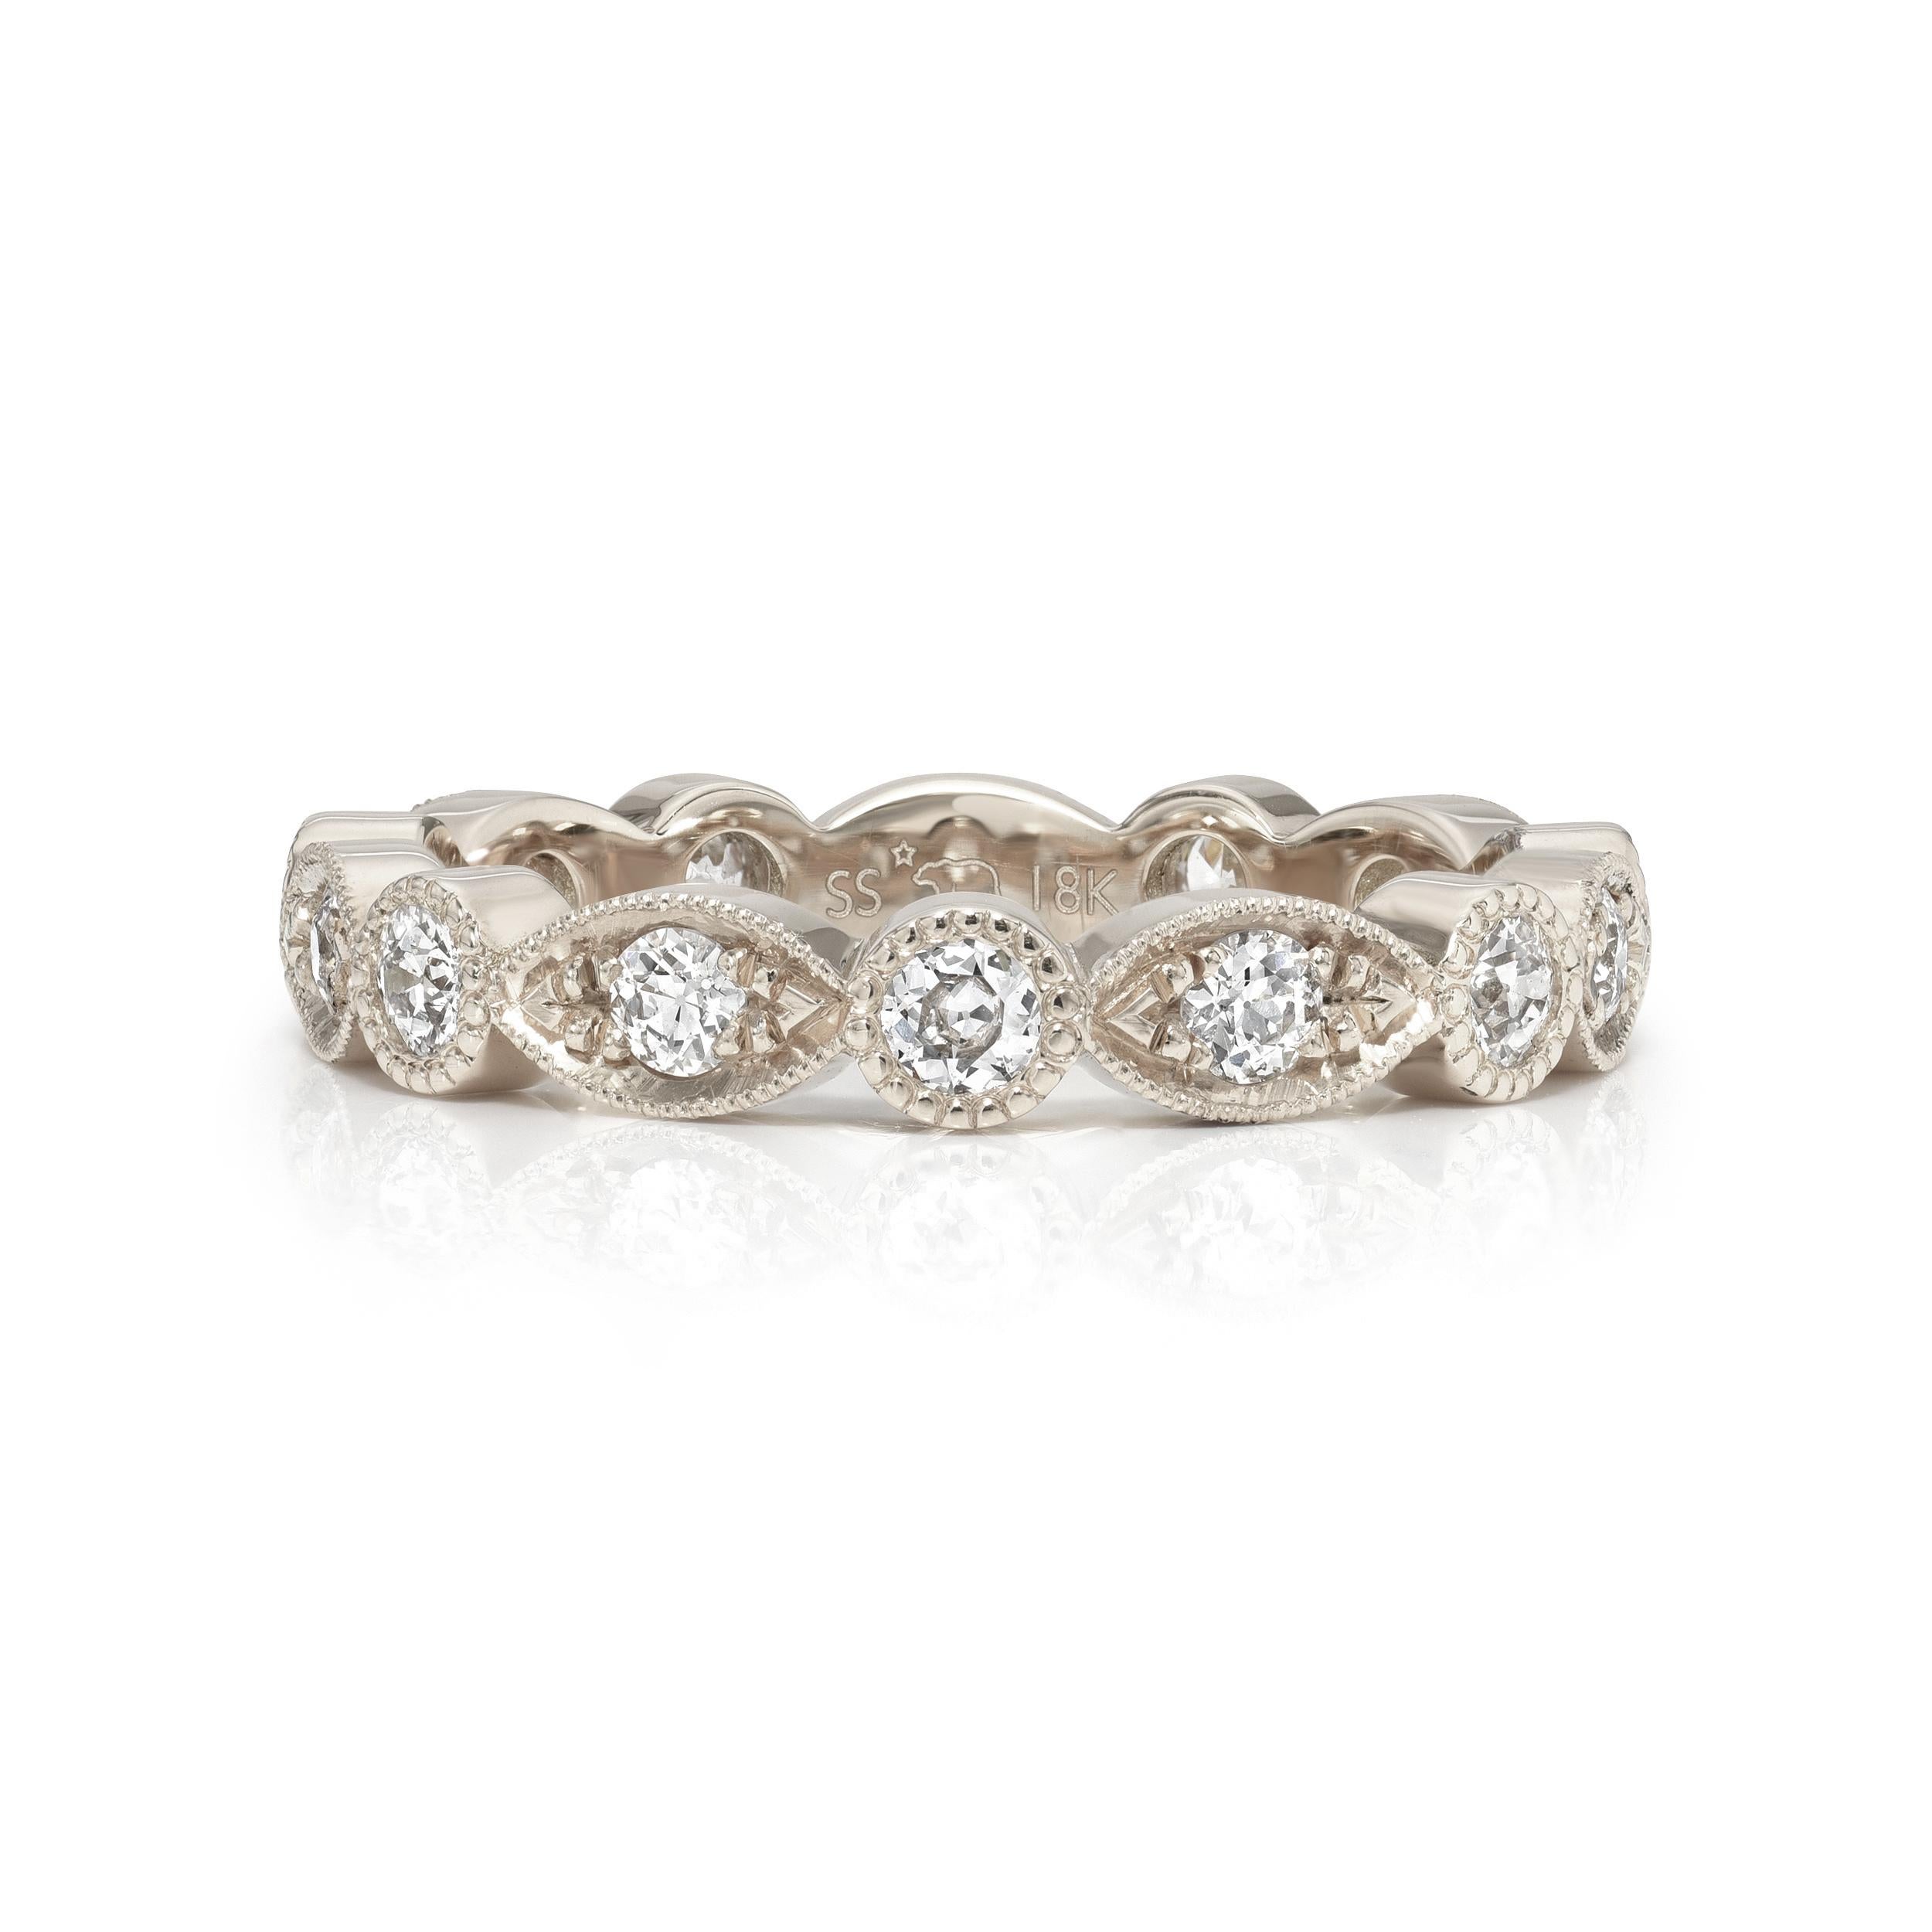 For Sale:  Handcrafted Elizabeth Old European Cut Diamond Eternity Band by Single Stone 3